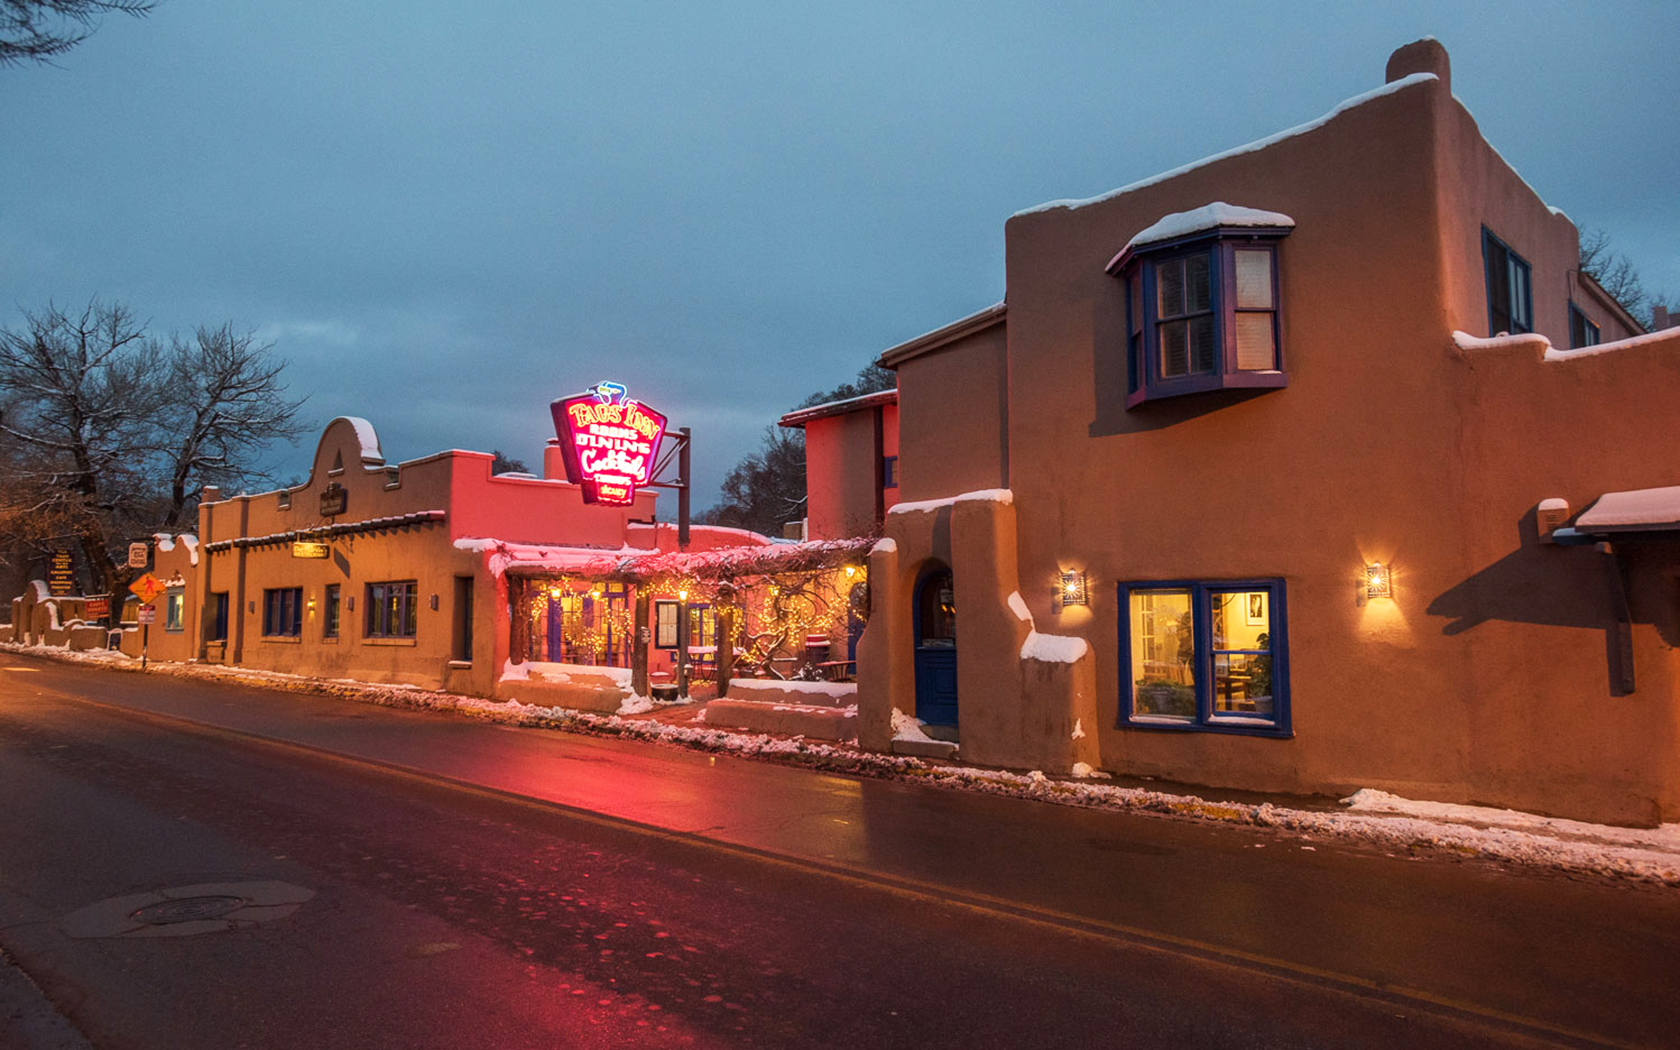 New Mexico Hotels The Historic Taos Inn Hotels In Taos New Mexico 7933